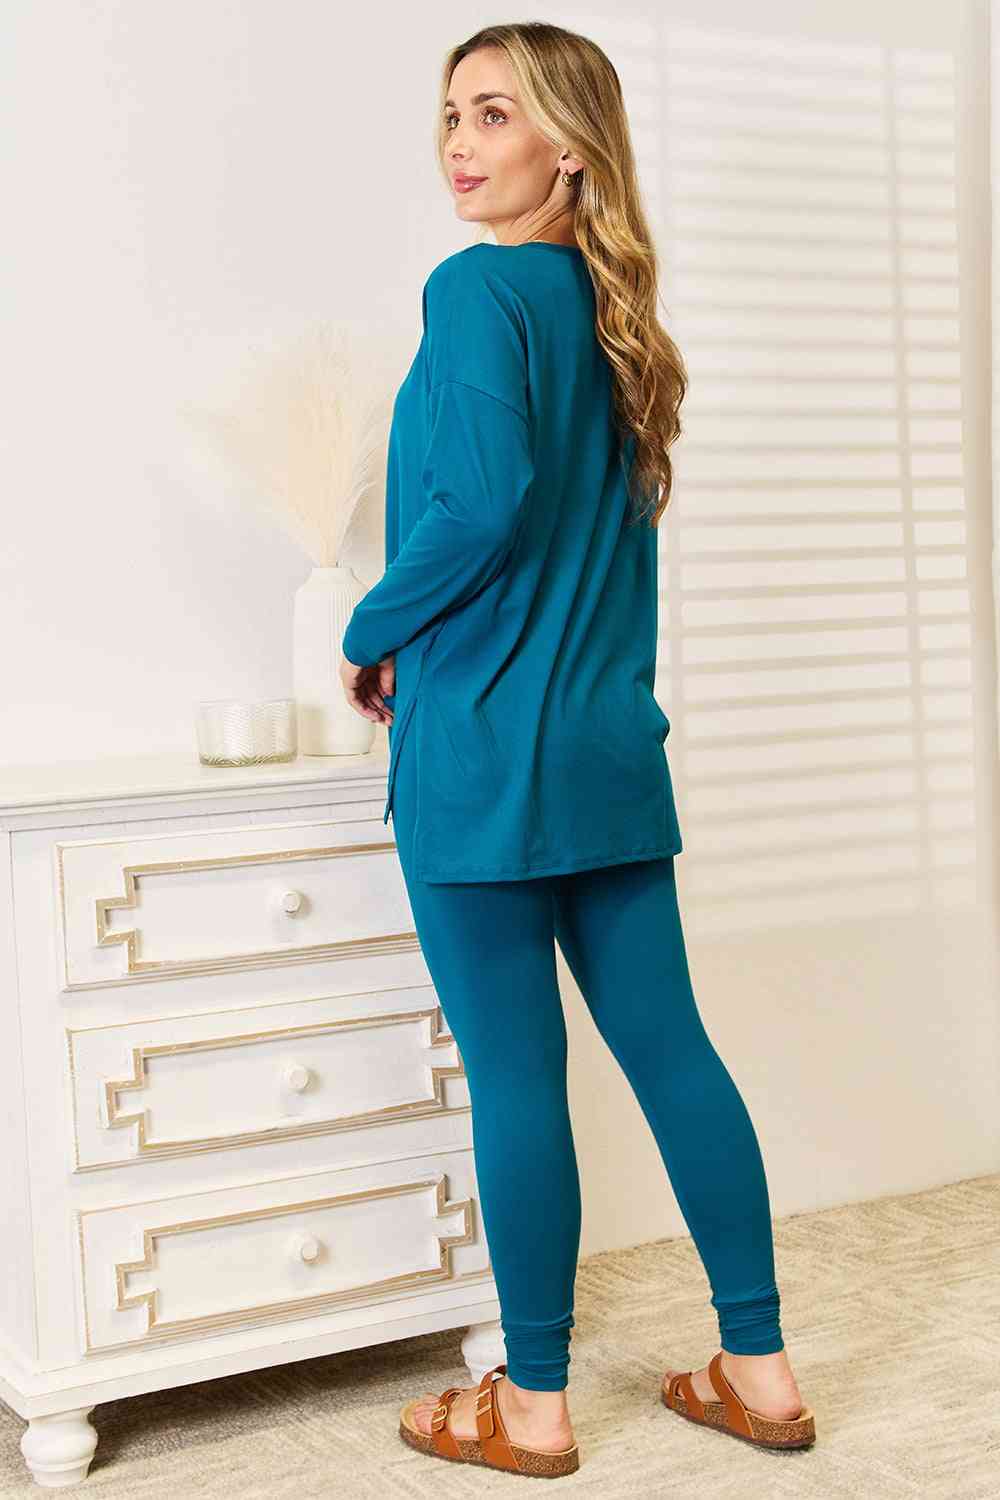 Lazy Days Full Size Long Sleeve Top and Leggings Set - Camis & Tops - Outfit Sets - 8 - 2024